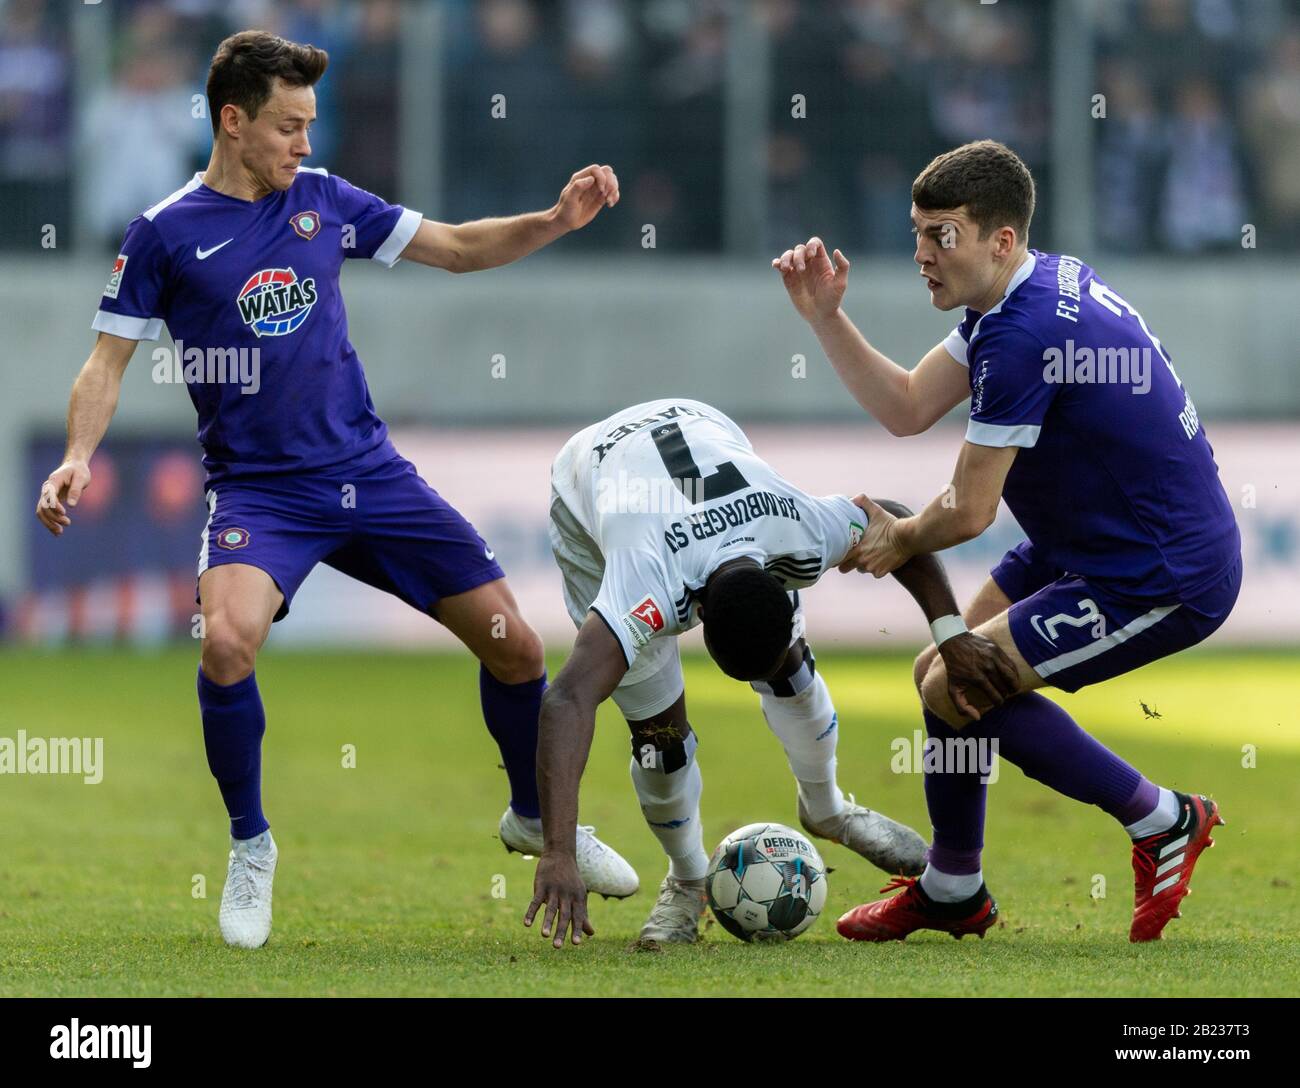 Aue, Germany. 29th Feb, 2020. Football: 2nd Bundesliga, FC Erzgebirge Aue - Hamburger SV, 24th matchday, at the Sparkassen-Erzgebirgsstadion. Aues Jacob Rasmussen (r) and Clemens Fandrich (l) against Hamburg's Khaled Narey. Credit: Robert Michael/dpa-Zentralbild/dpa - IMPORTANT NOTE: In accordance with the regulations of the DFL Deutsche Fußball Liga and the DFB Deutscher Fußball-Bund, it is prohibited to exploit or have exploited in the stadium and/or from the game taken photographs in the form of sequence images and/or video-like photo series./dpa/Alamy Live News Credit: dpa picture alliance Stock Photo